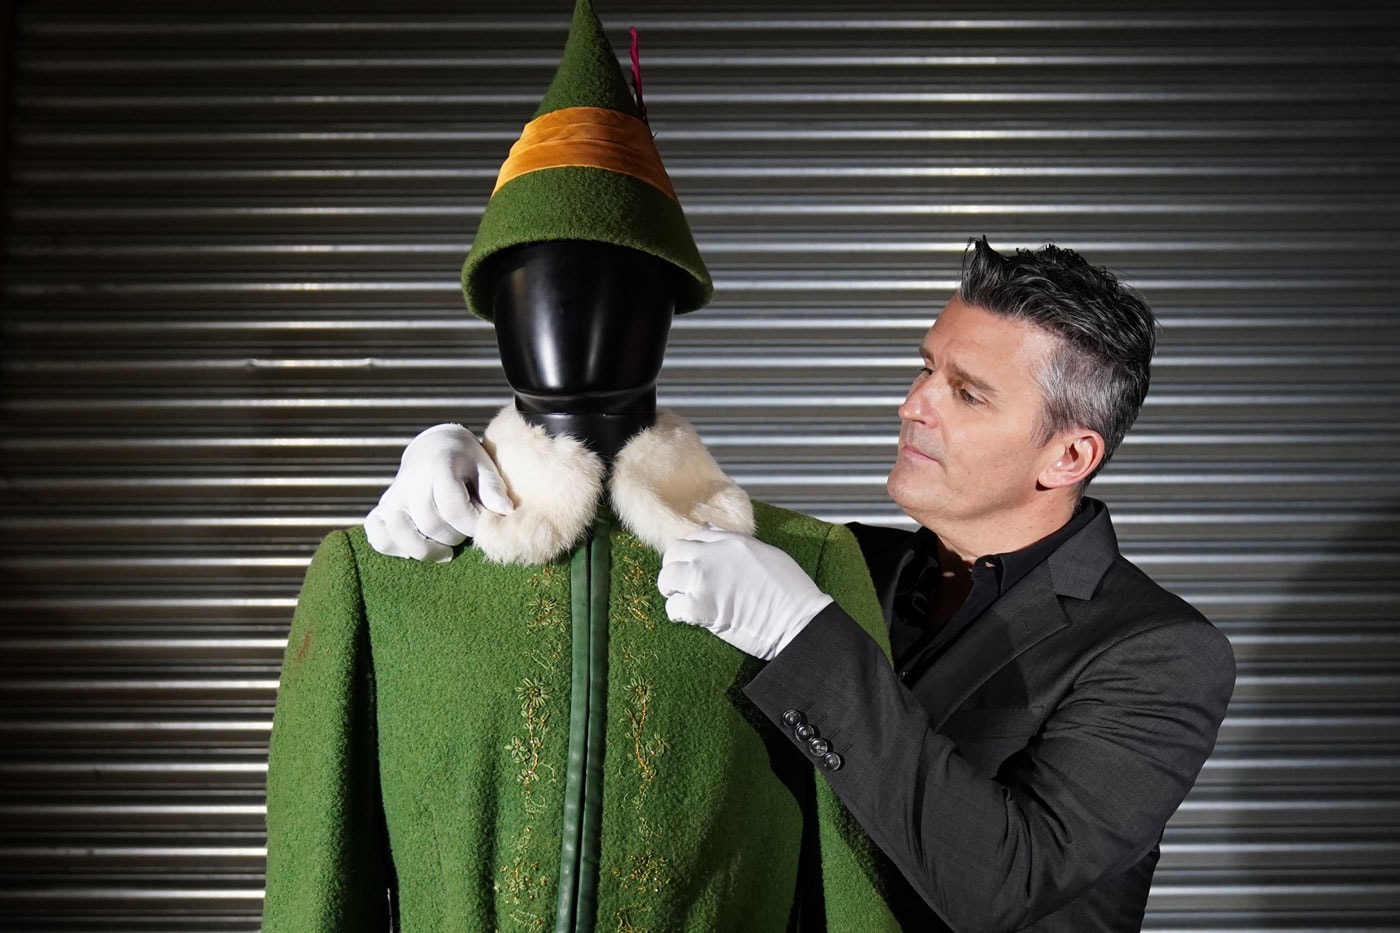 https://image-cdn.hypb.st/https%3A%2F%2Fhypebeast.com%2Fimage%2F2021%2F11%2Fwill-ferrell-elf-costume-sold-for-300k-at-prop-store-auction-announcement-001.jpg?cbr=1&q=90